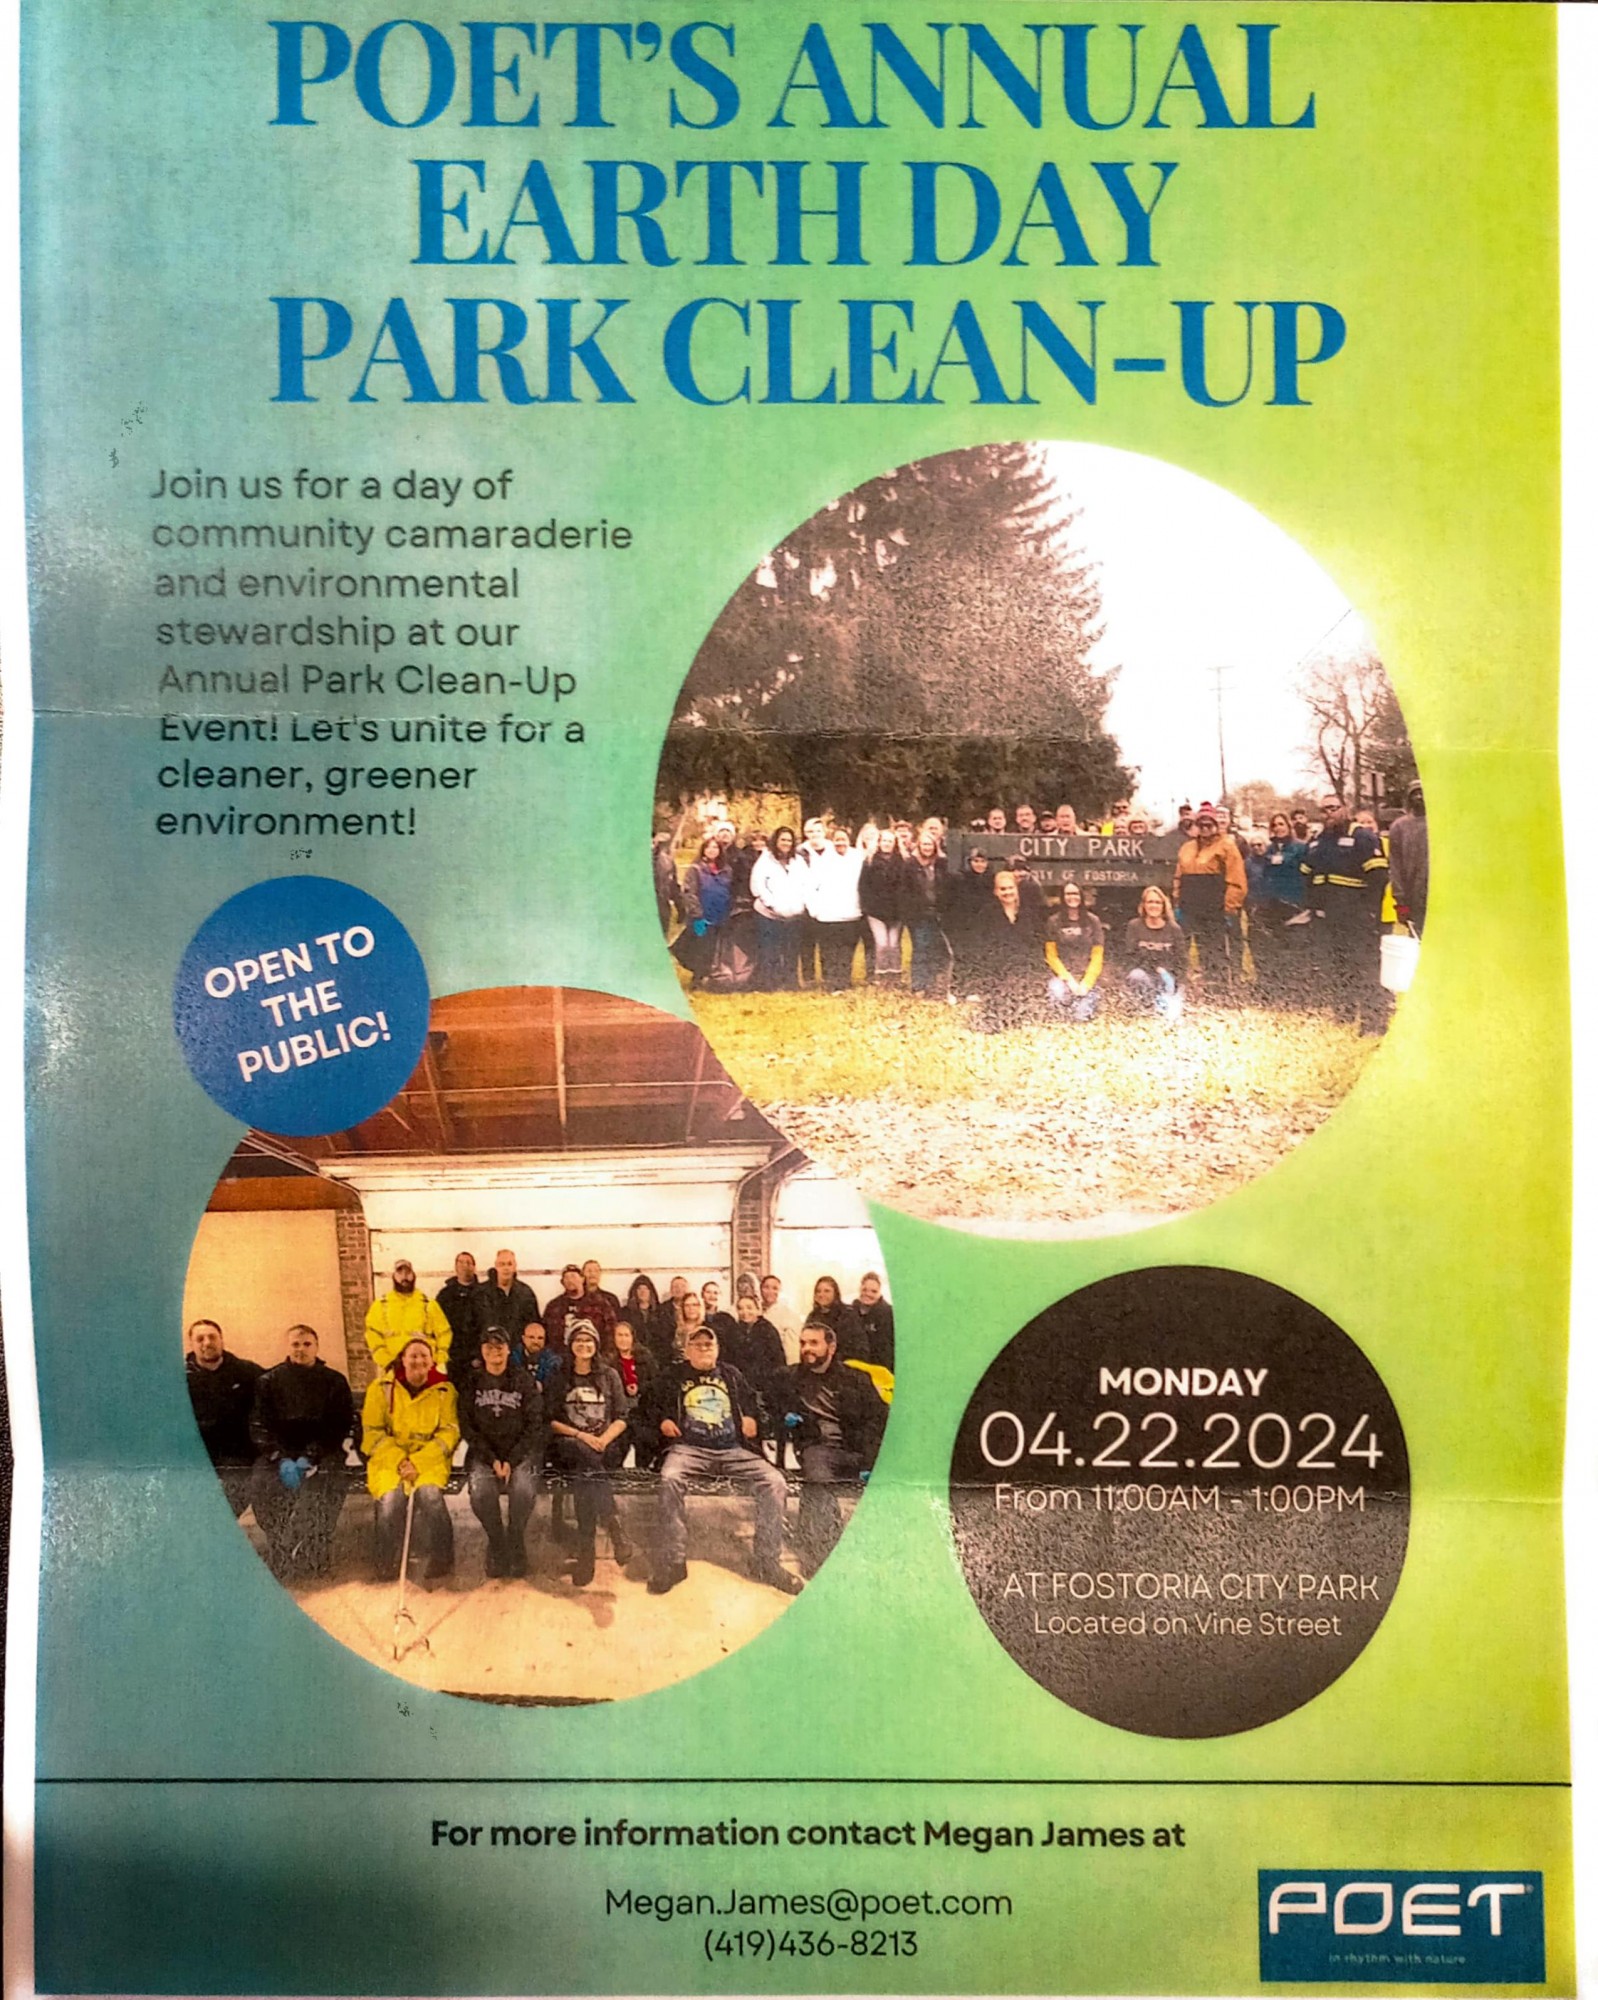 POET's Annual Earth Day Park Clean-Up